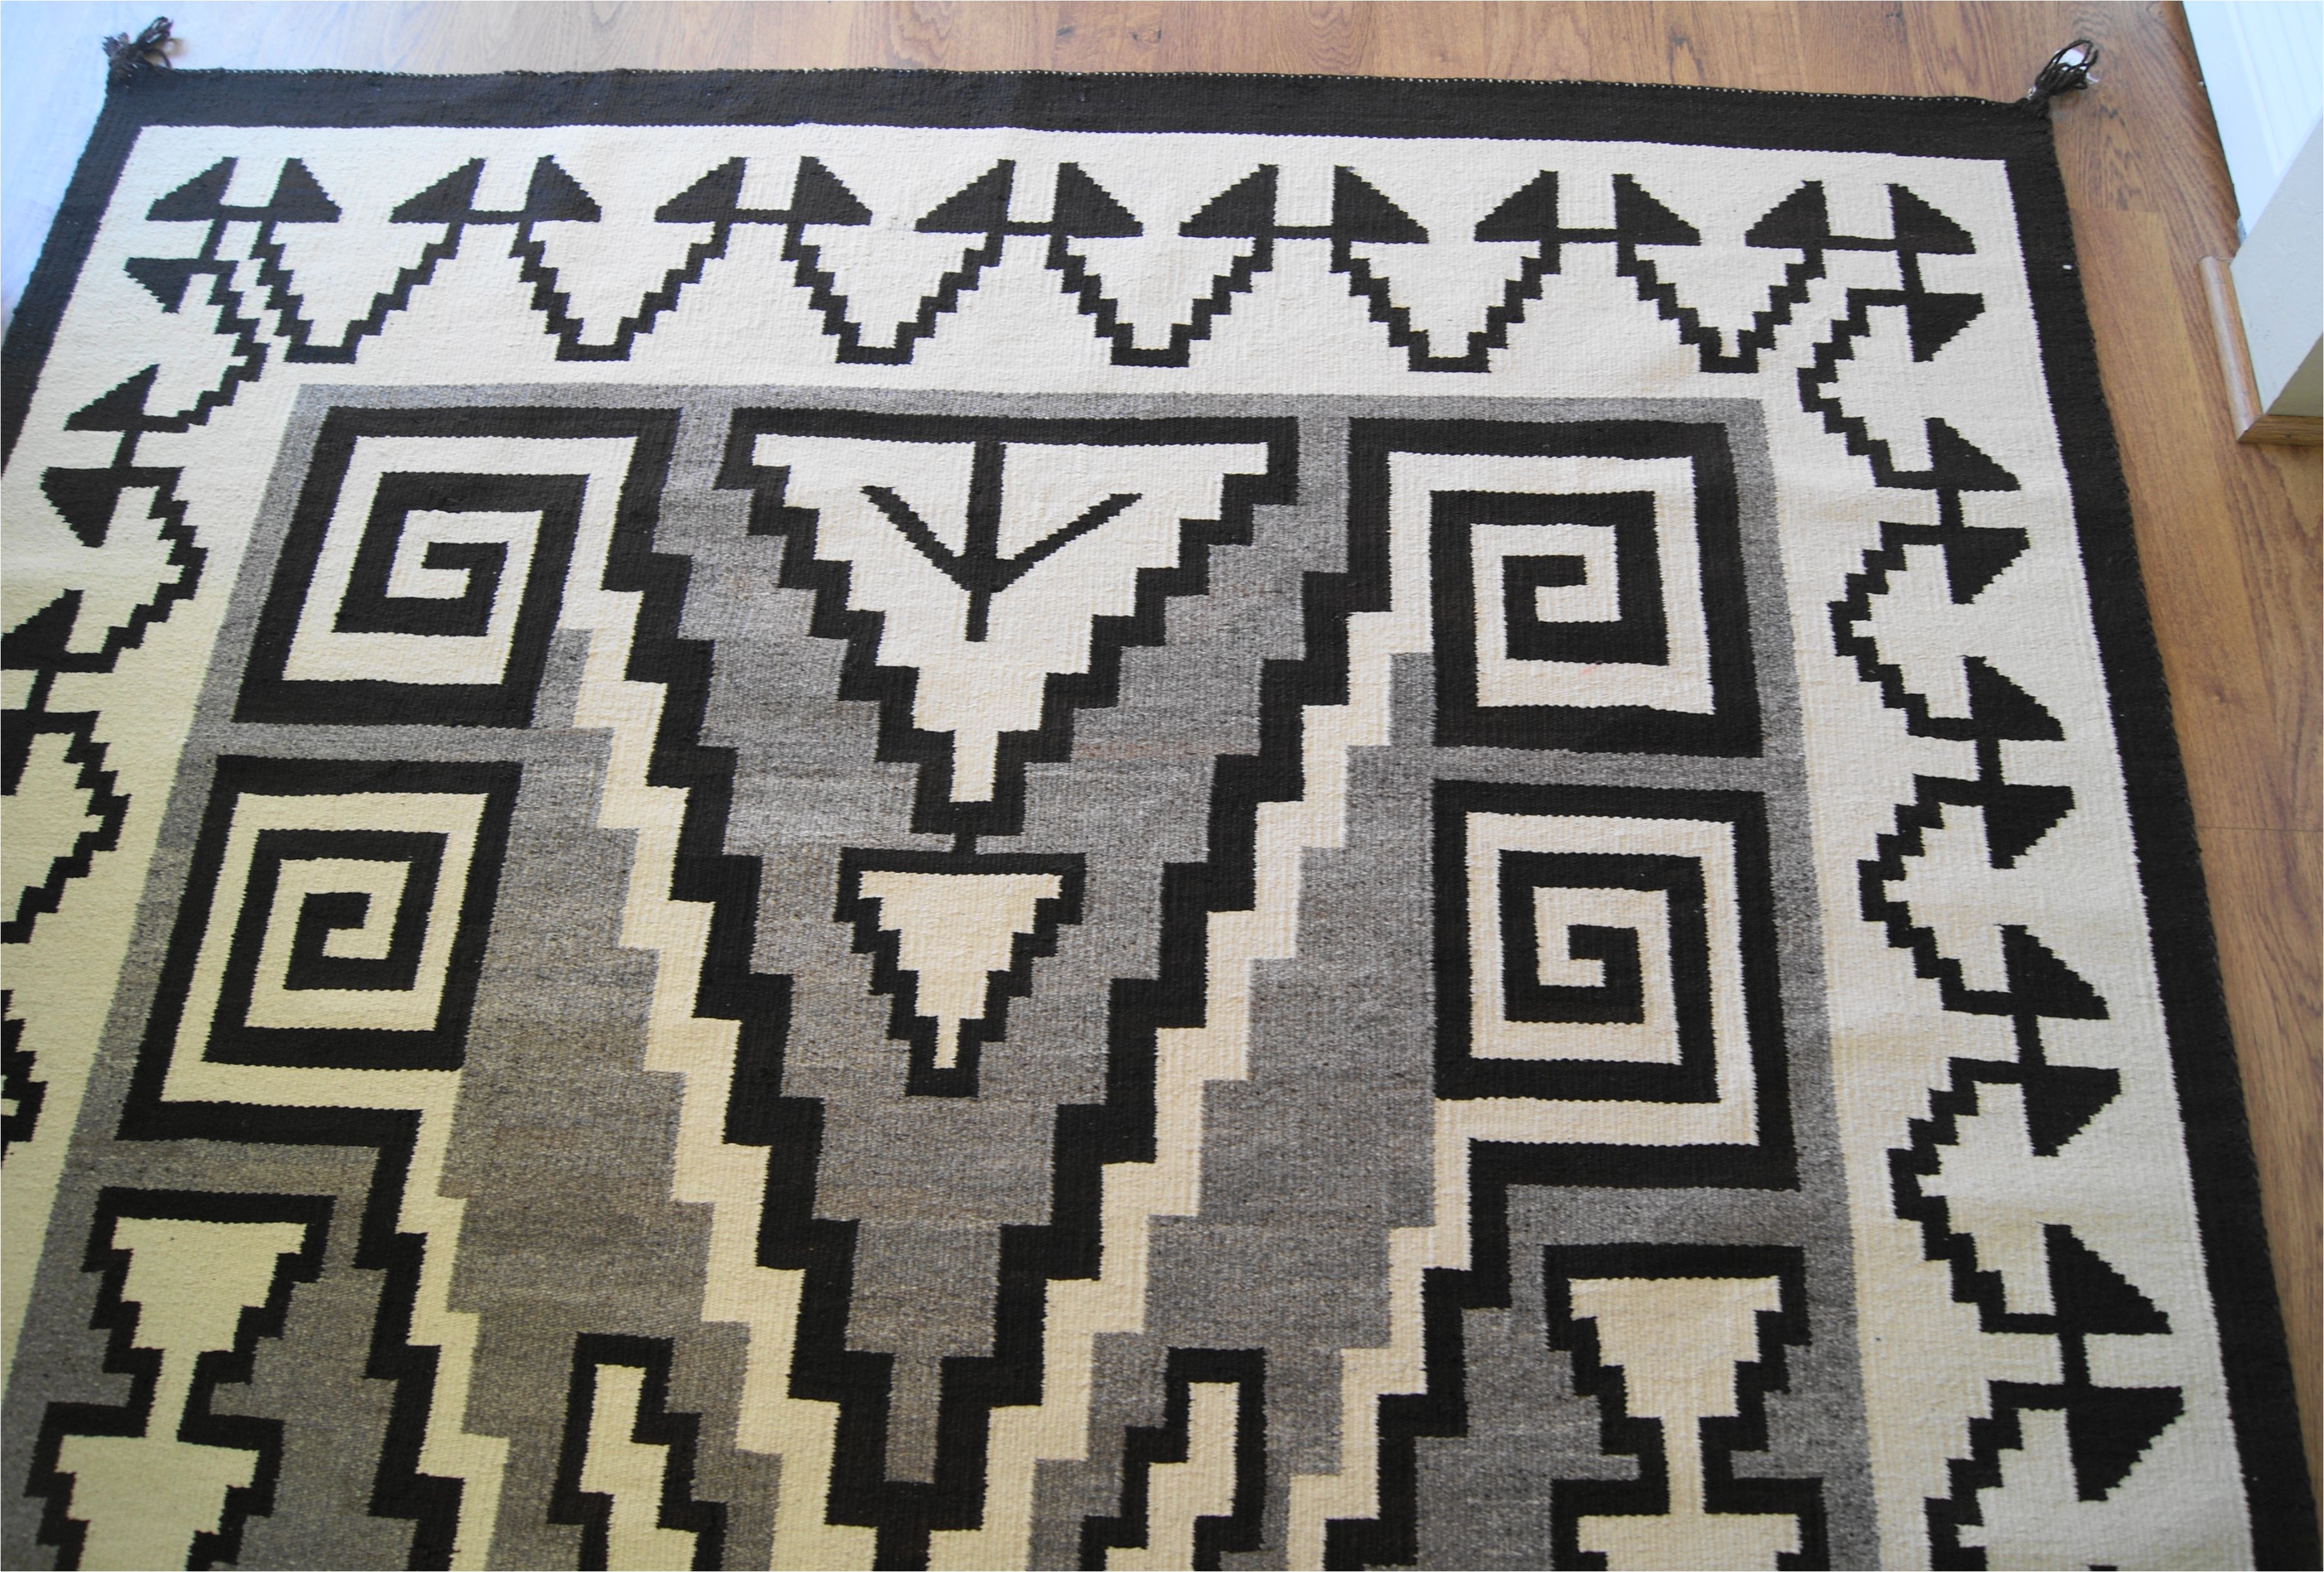 historic two grey hills storm pattern variant navajo rug weaving for sale photo 9 click photo for a large view click your back button to return